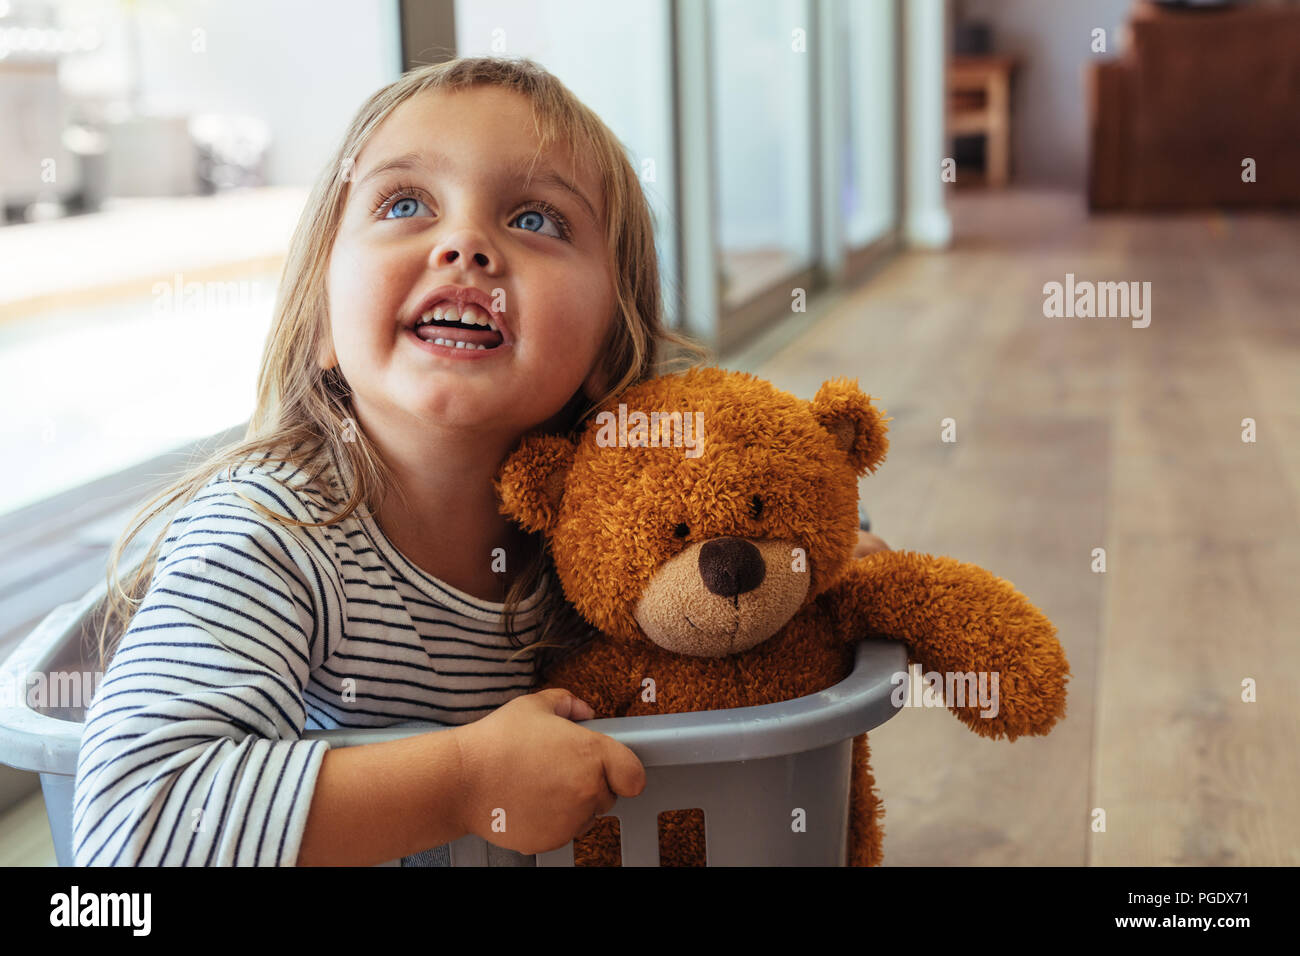 Adorable young girl sitting in a washing basket with her teddy bear. Beautiful girl child playing in a washing basket at home. Stock Photo